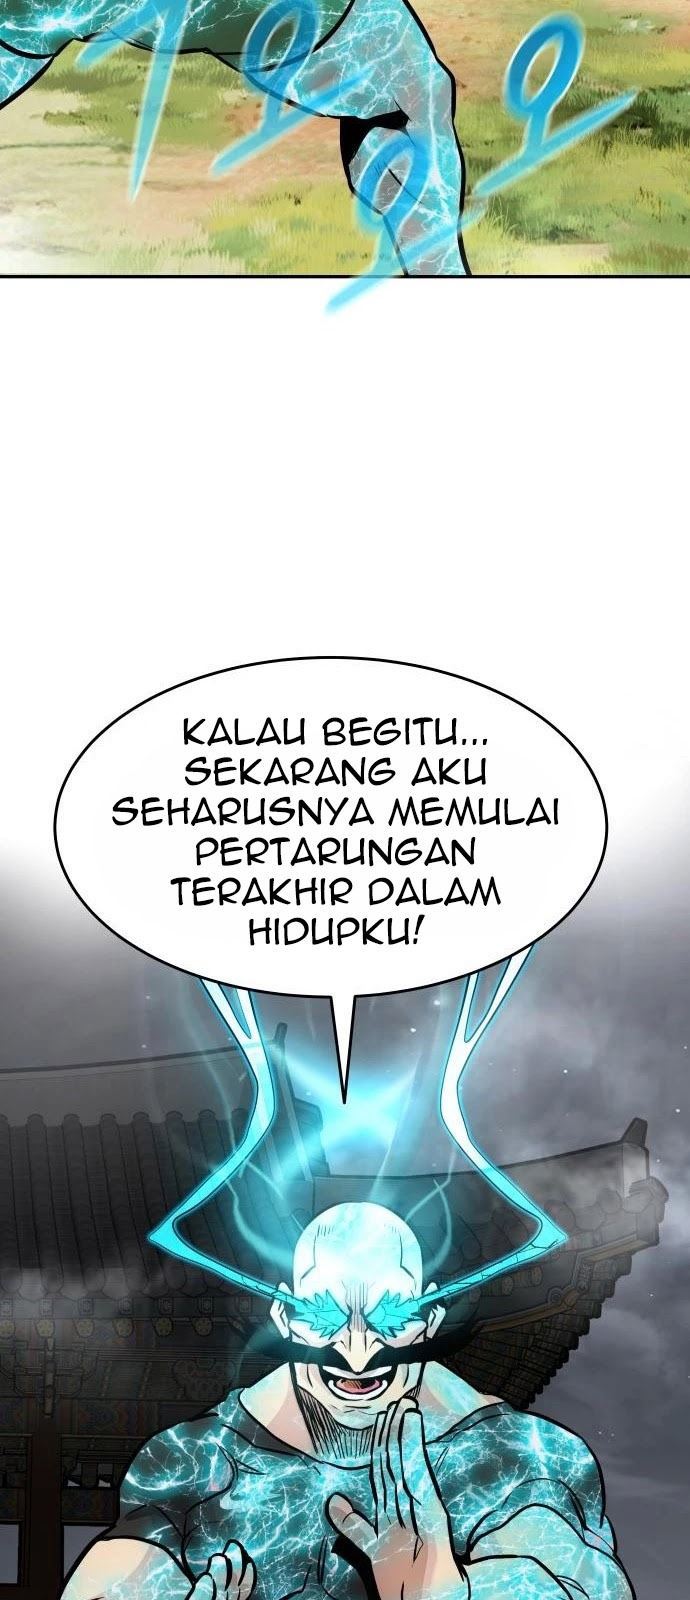 All Rounder Chapter 21